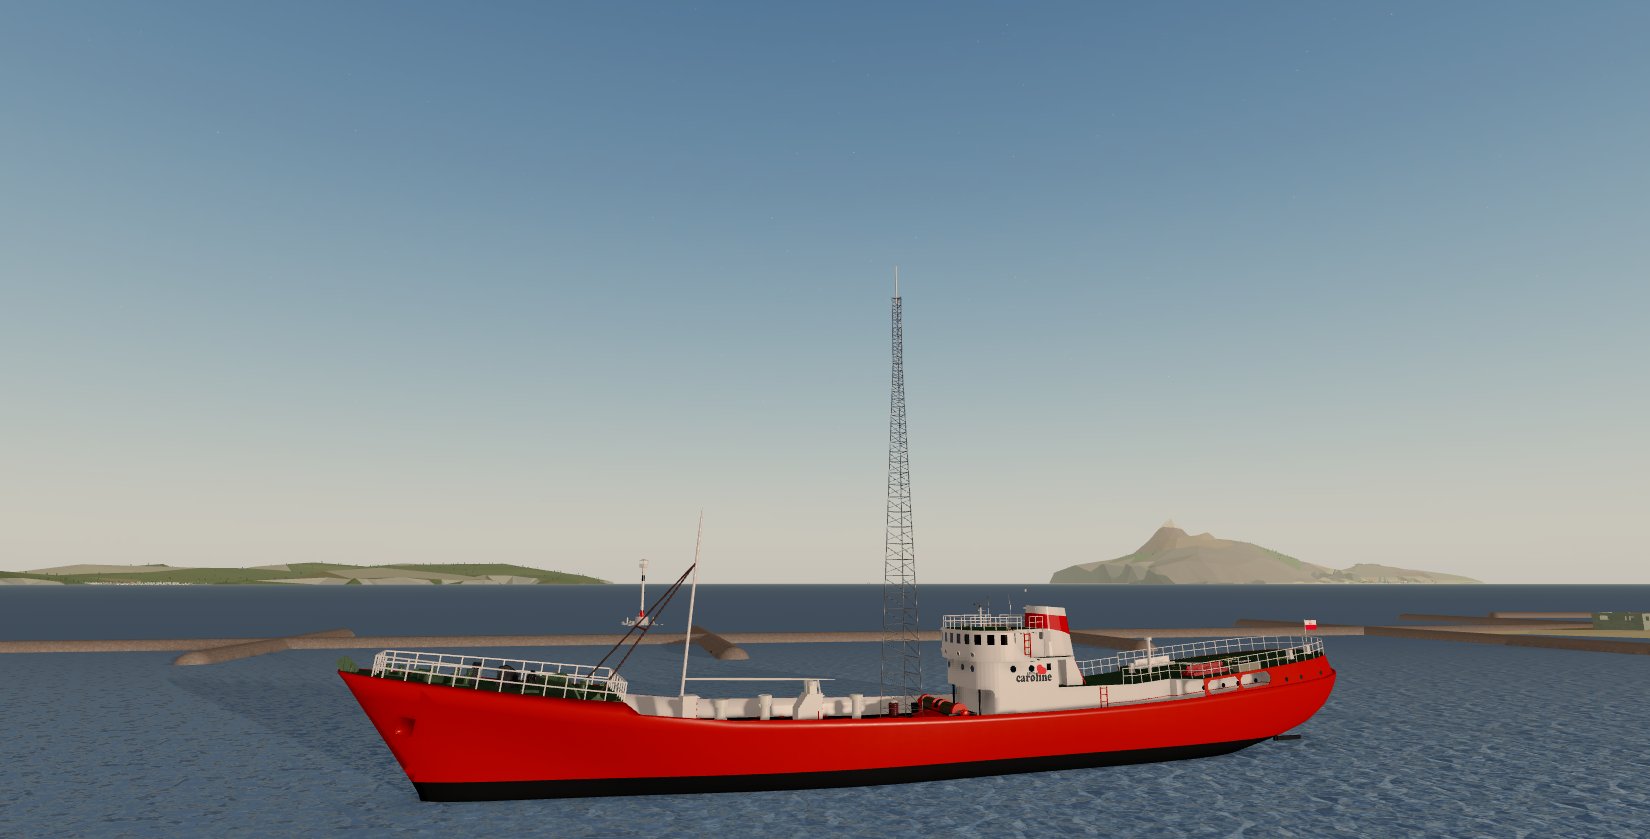 Captainmarcin On Twitter A New Dynamic Ship Simulator 3 Update